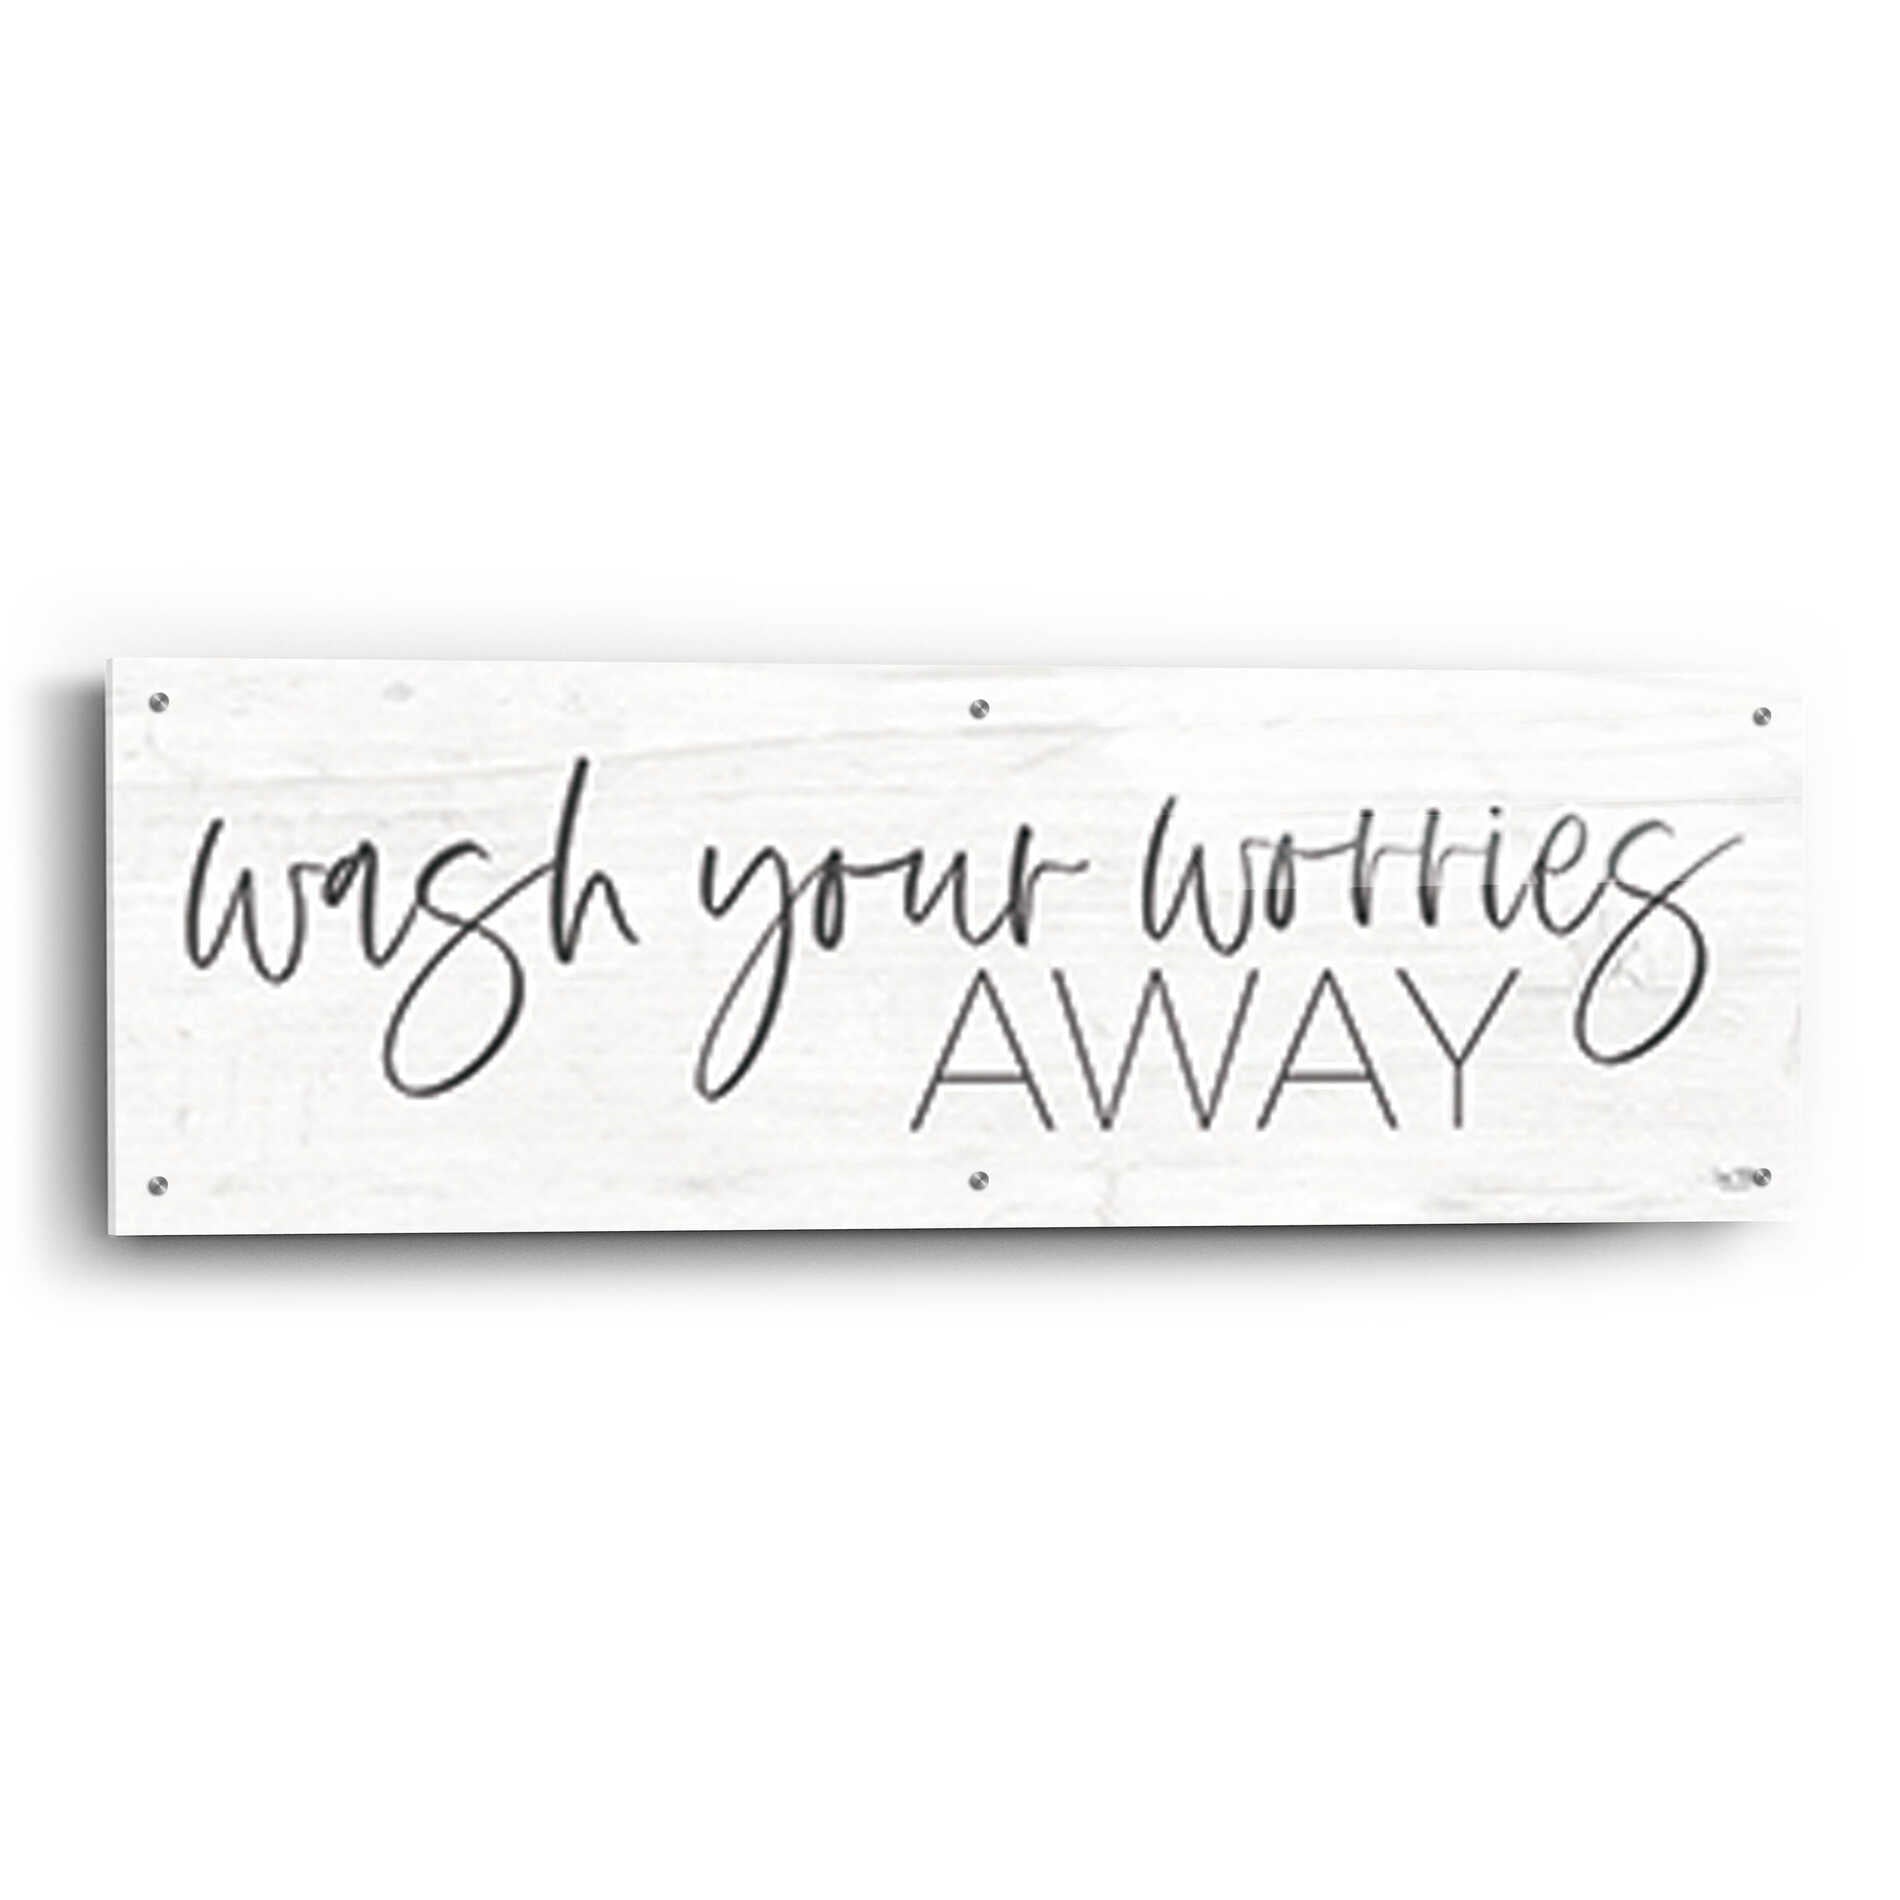 Epic Art 'Wash Your Worries Away' by Lux + Me Designs , Acrylic Glass Wall Art,48x16